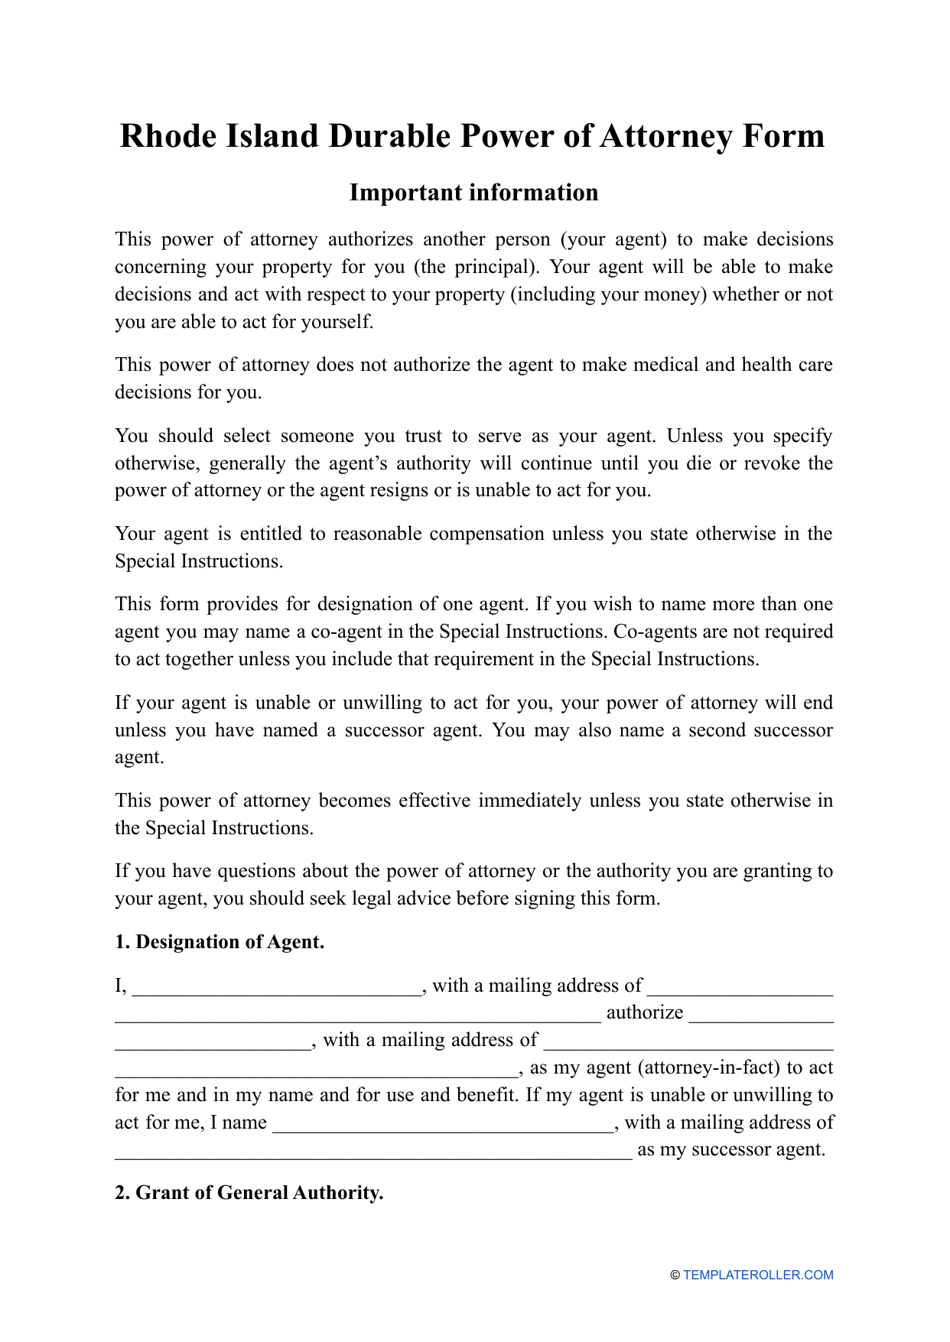 Durable Power of Attorney Form - Rhode Island, Page 1